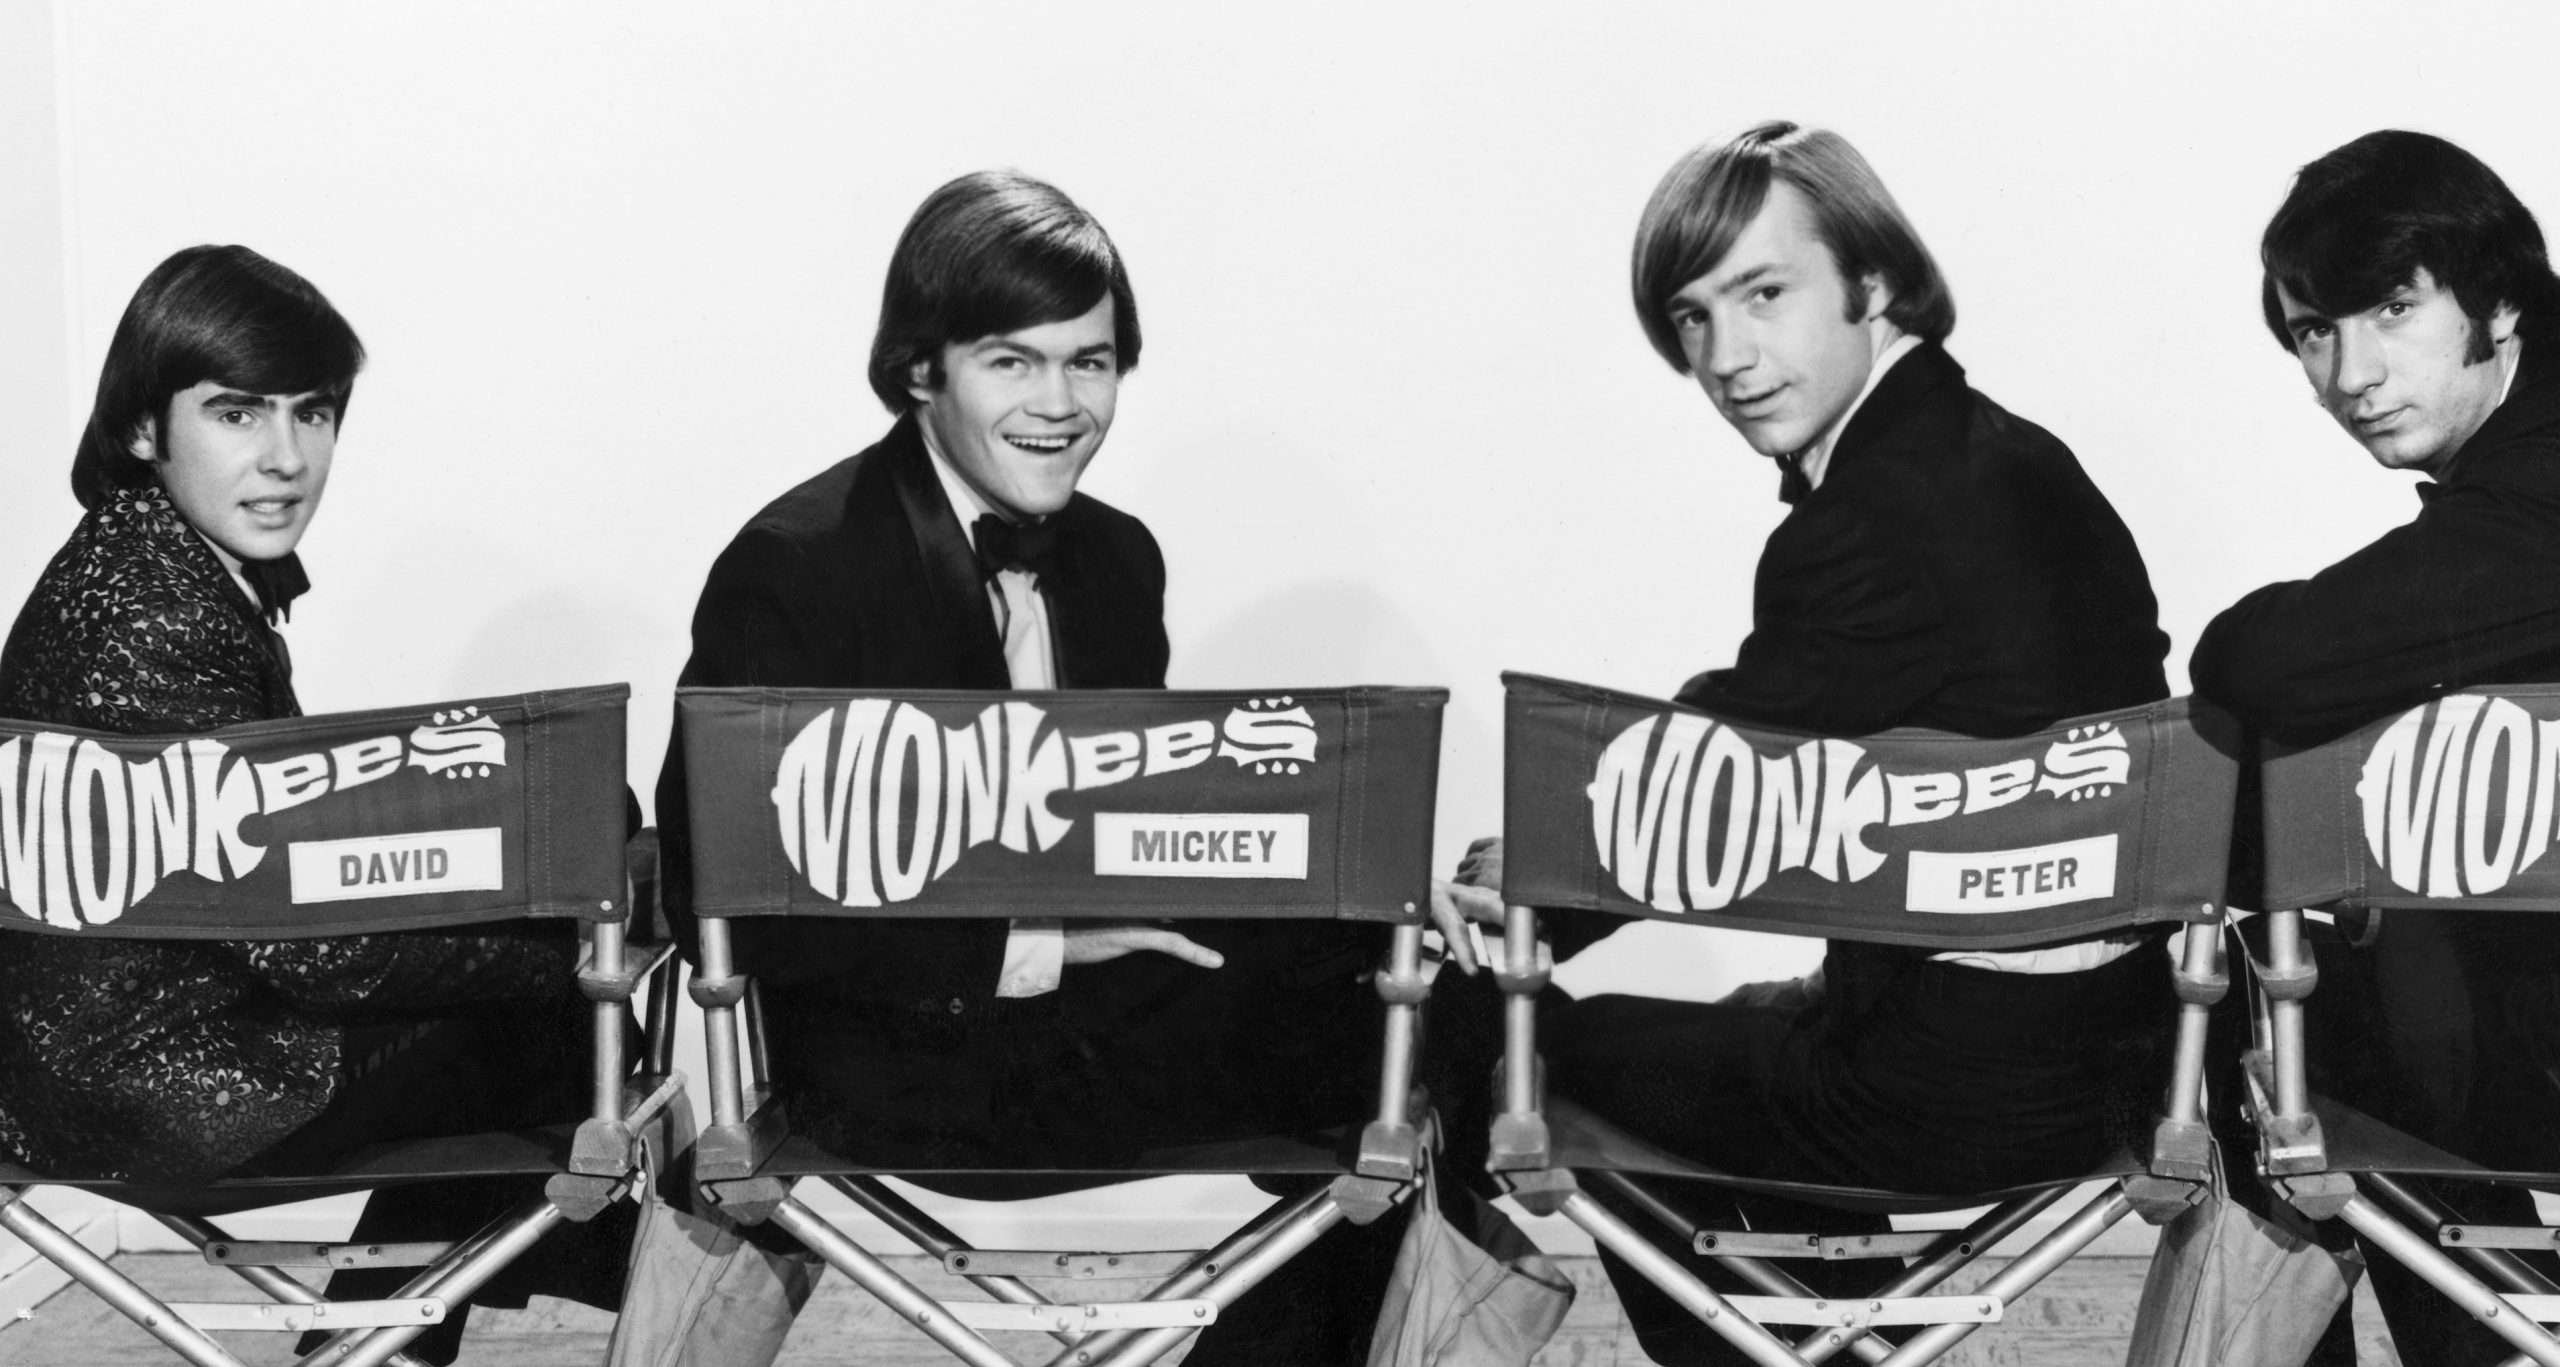 The Monkees' Davy Jones, Micky Dolenz, Peter Tork, and Mike Nesmith in chairs